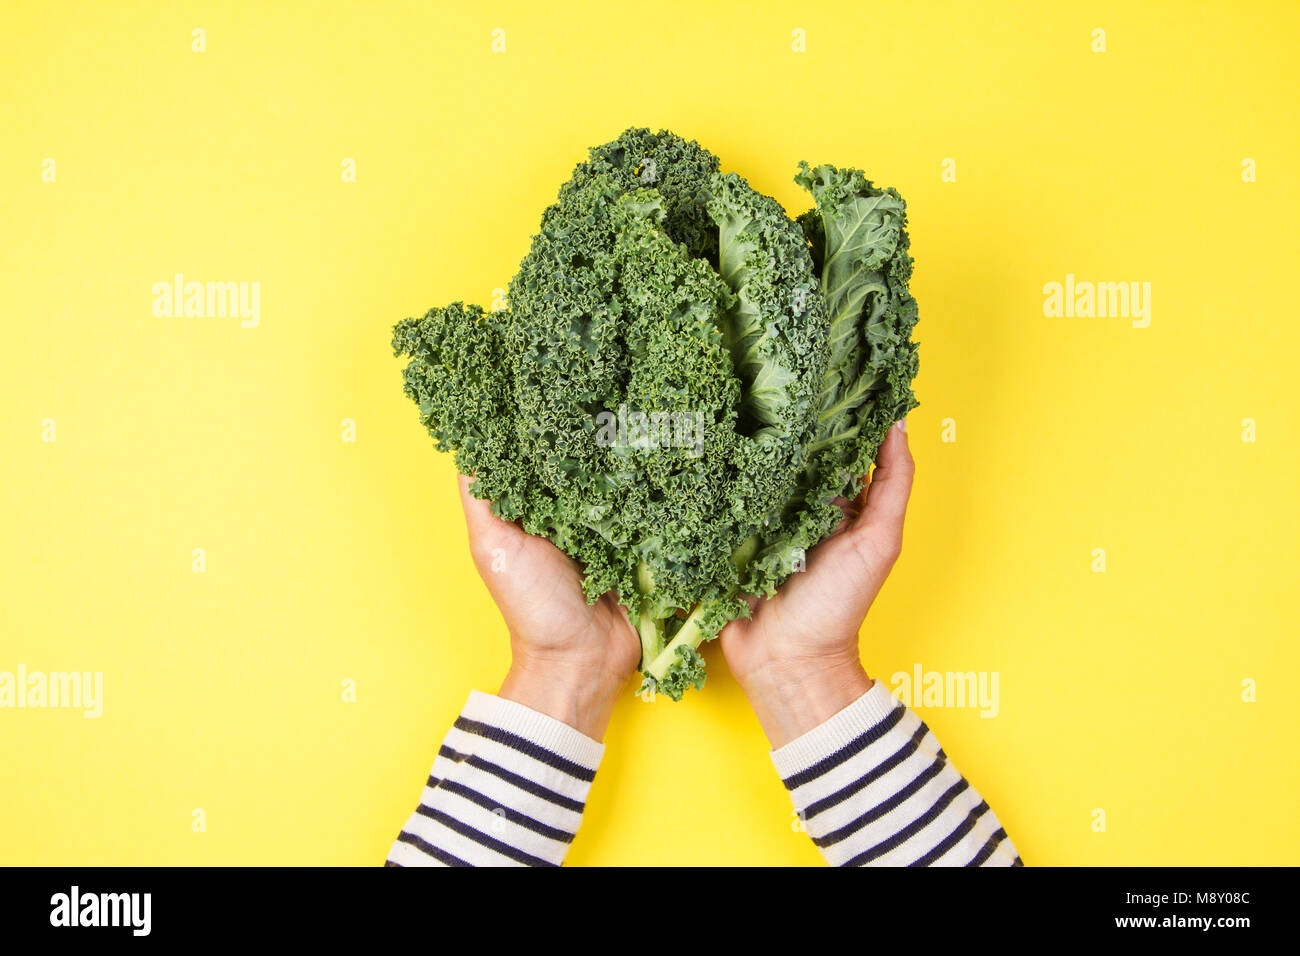 Woman hand holding a bunch of kale leaves over yellow background Stock Photo